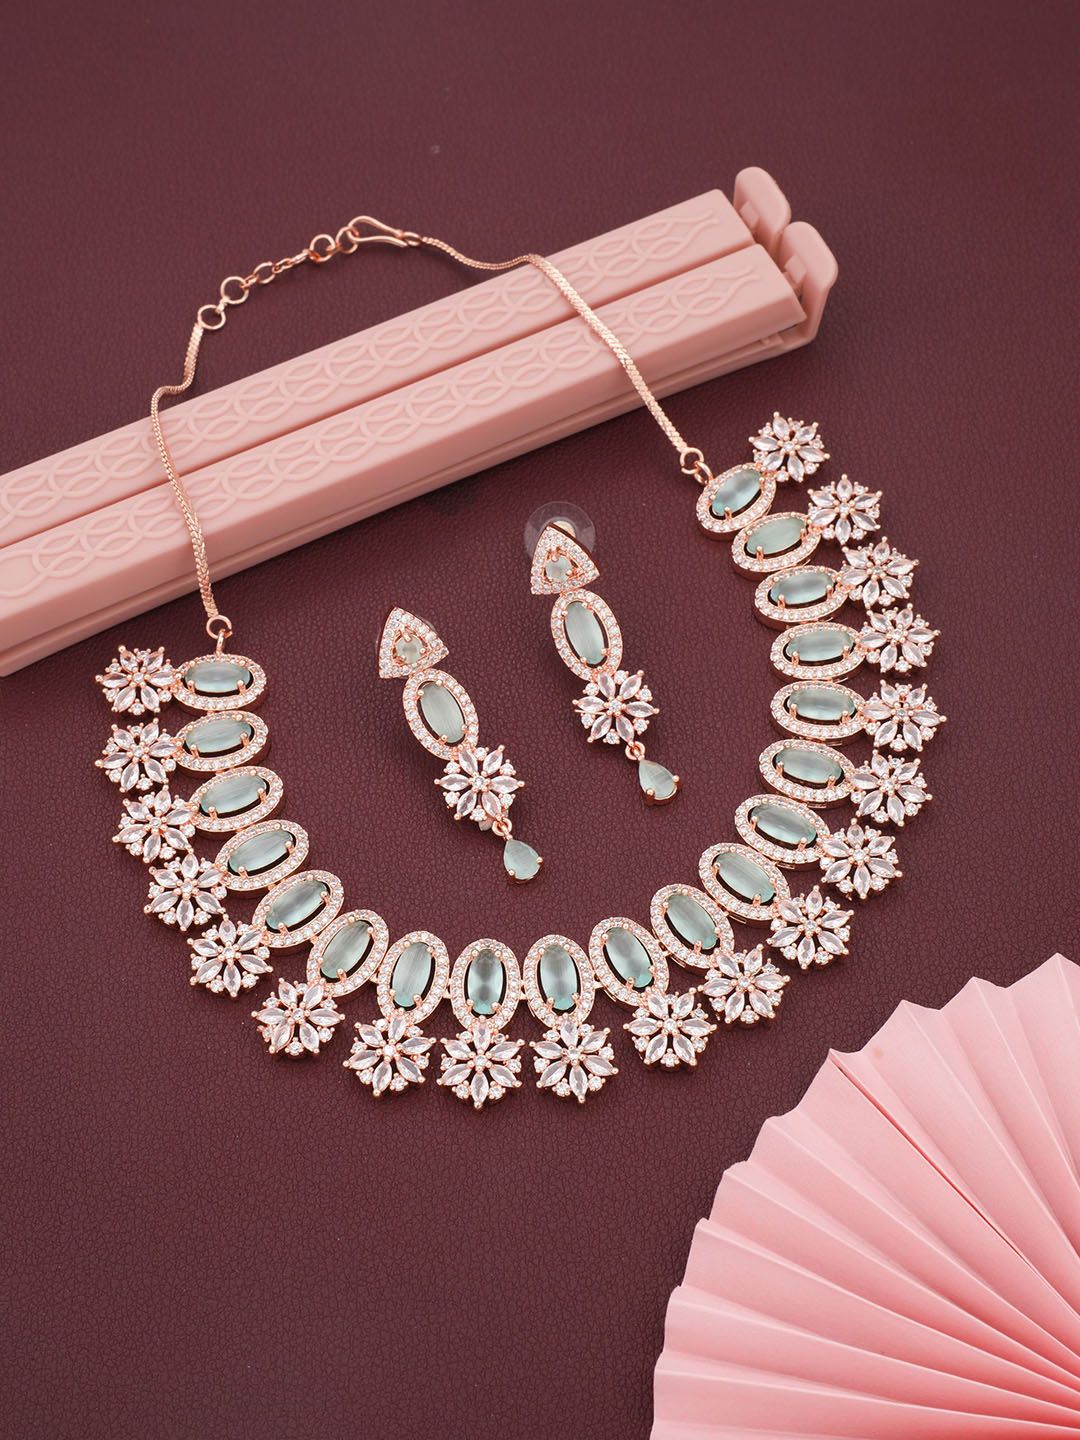 Buy Rose Gold plated Imitation Jewelry Set Necklace with CZ Stones - Griiham